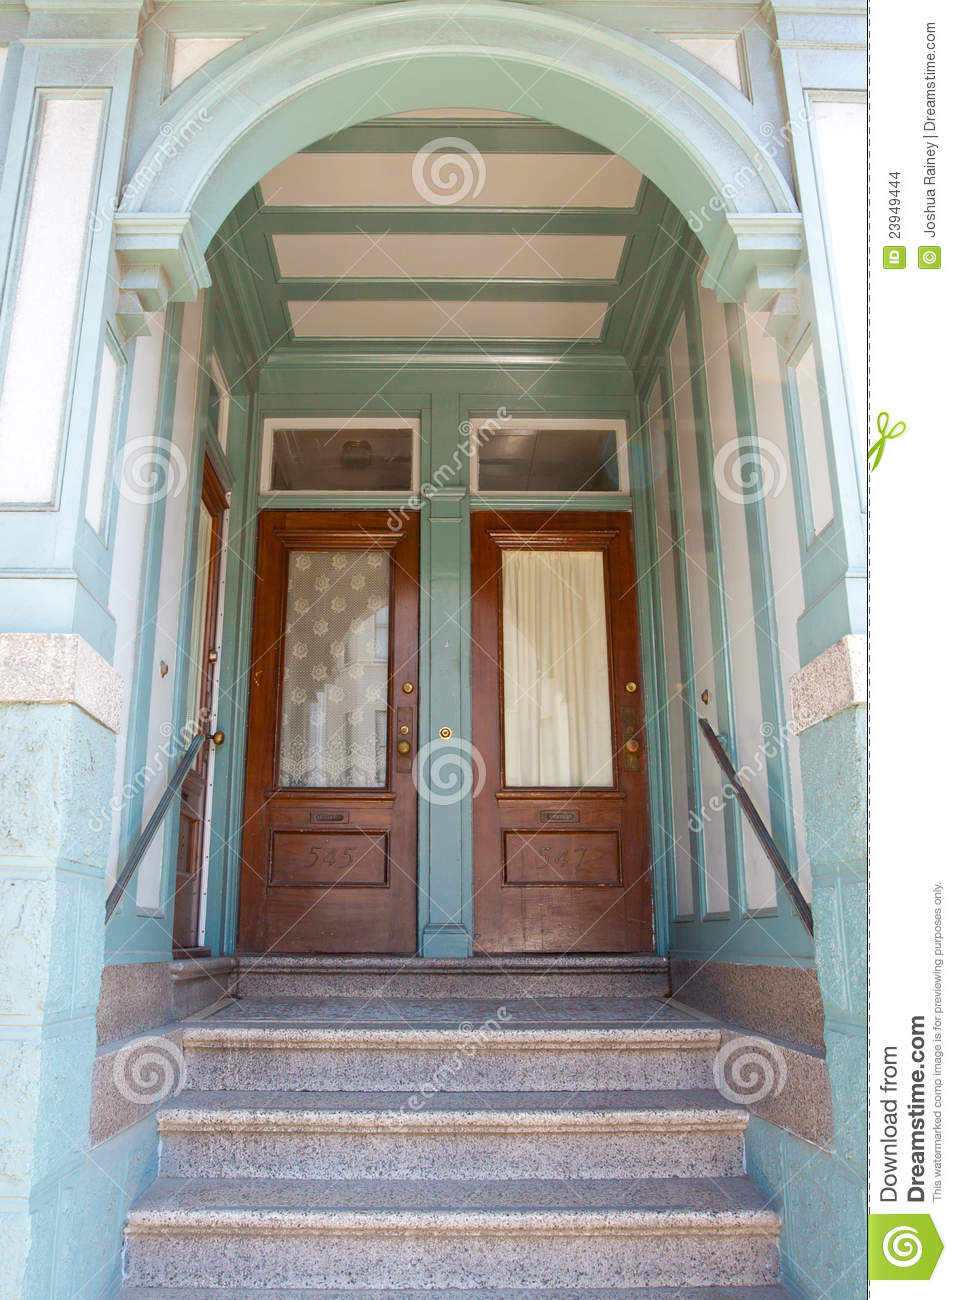 Gogeous Old Doors Show The Entrance To An Historic Home In San